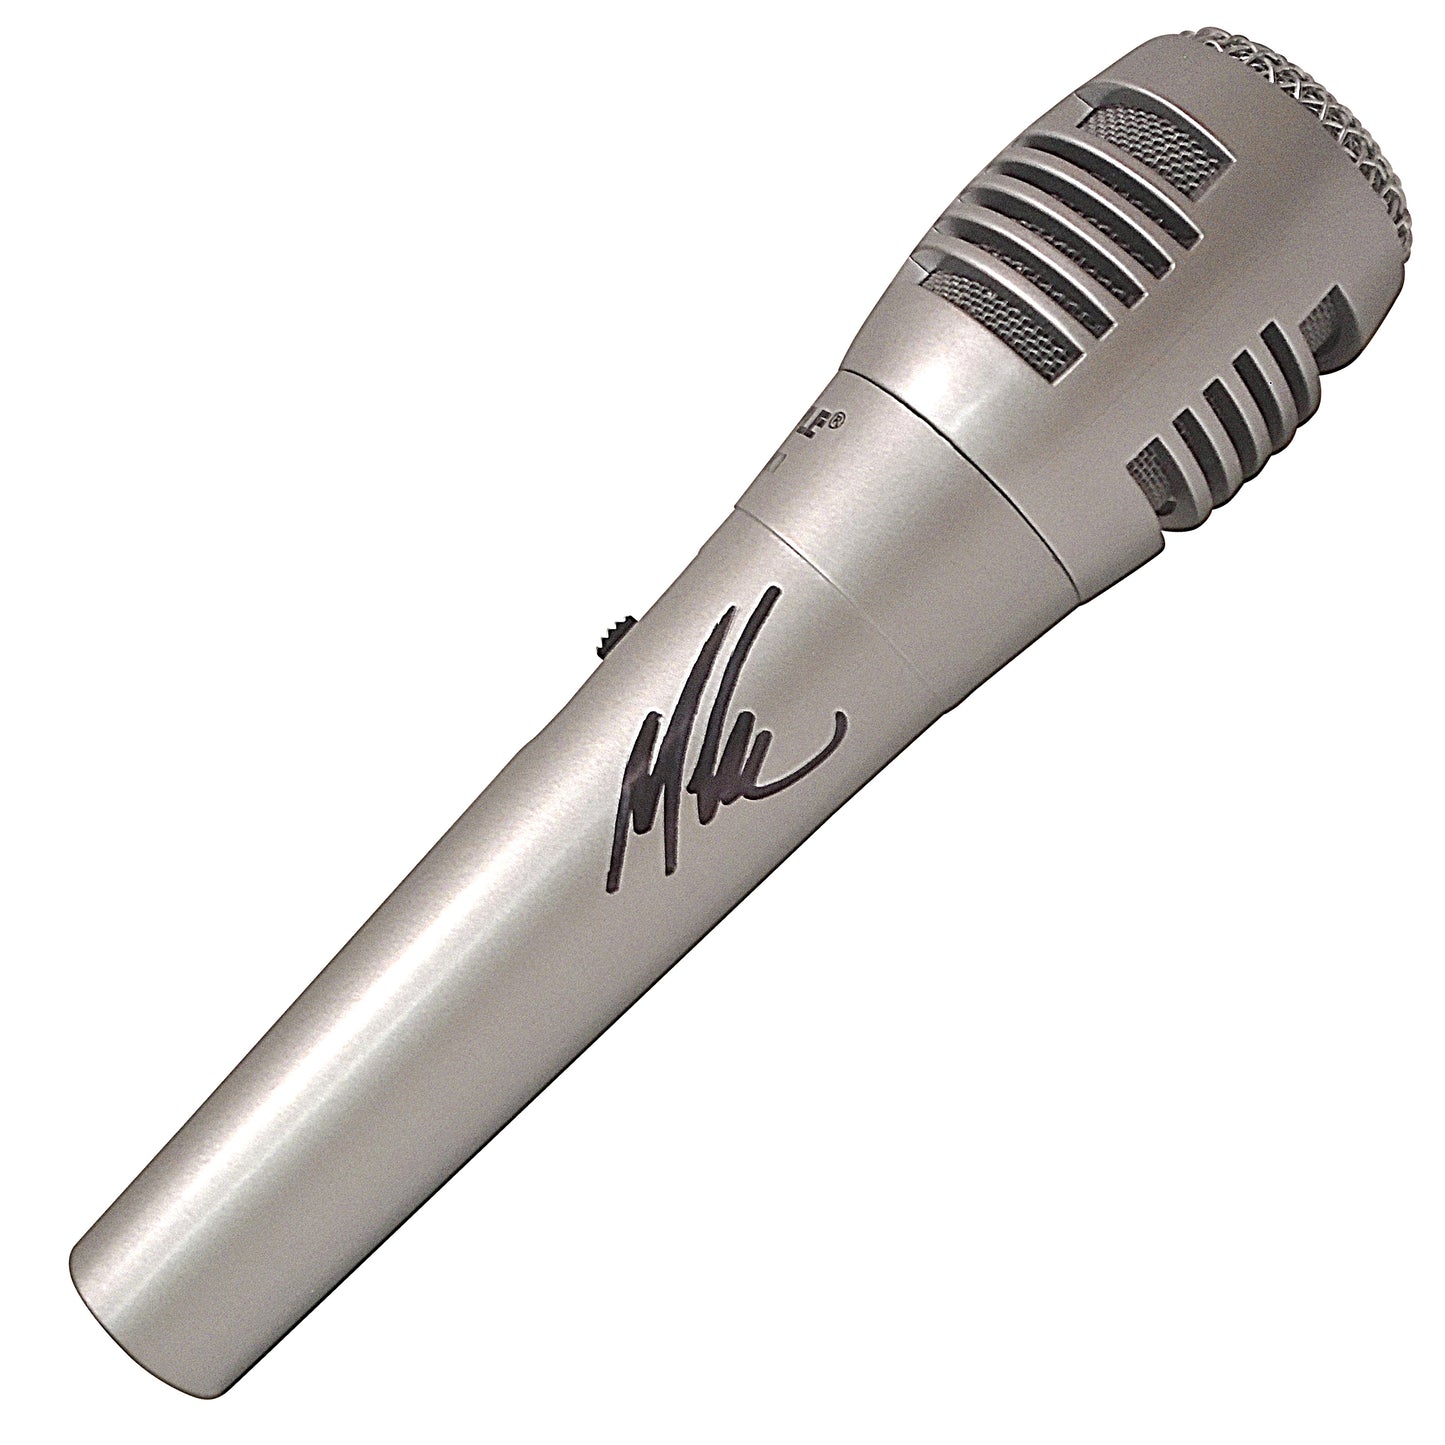 Hollywood-Autographed - Comedian Mike Epps Signed Pyle Full Size Microphone, Proof Photo - Beckett BAS 303